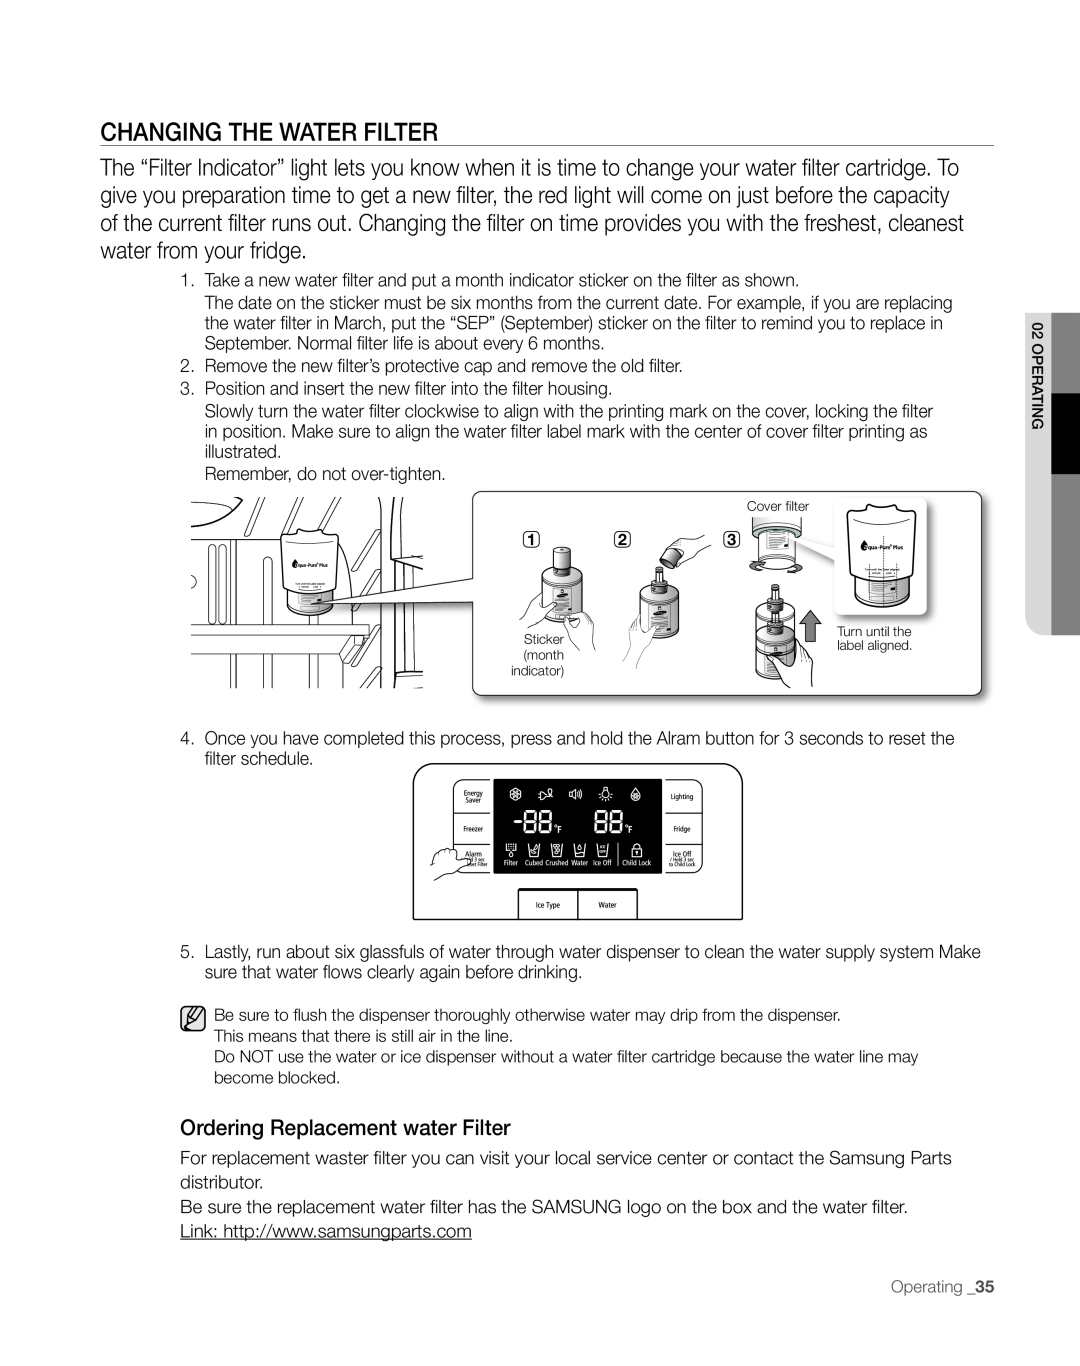 Sears RFG297AA manual CHAnGinG tHE wAtER FiLtER, Ordering Replacement water Filter 